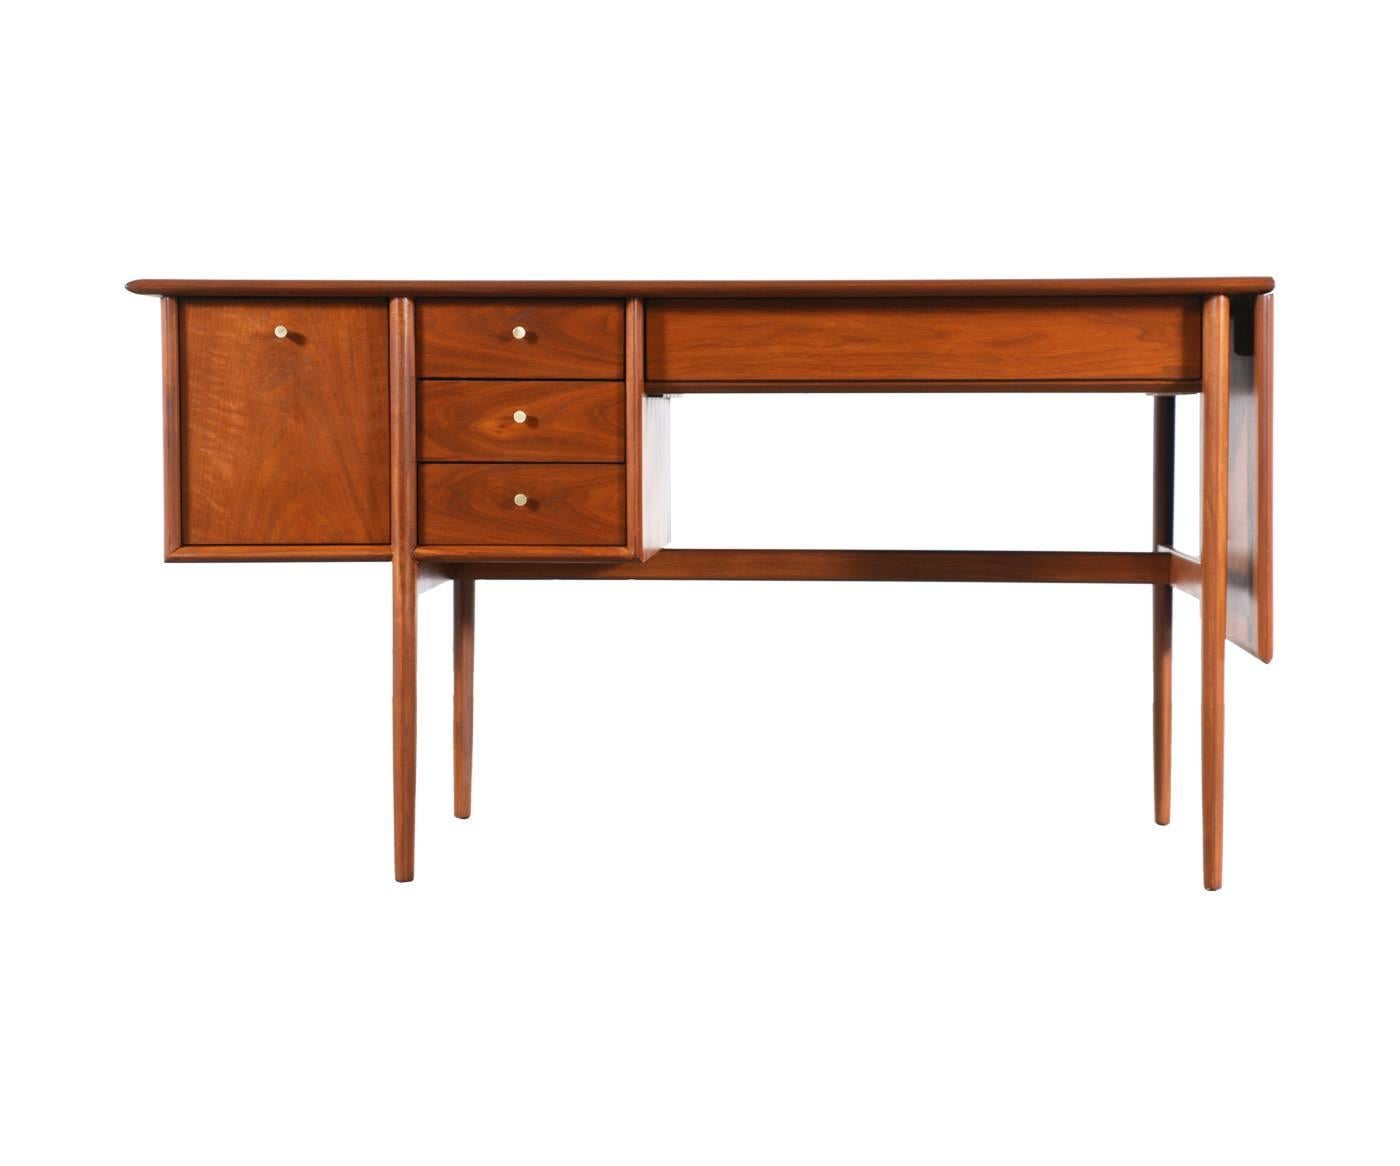 Designer: Barney Flagg.
Manufacturer: Drexel “Parallel.”
Period/Style: Mid-Century Modern.
Country: United States.
Date: 1950s.

Dimensions: 29″H x 72″L x 26.5″W.
Materials: Walnut, brass.
Condition: Excellent, newly refinished.
Number of